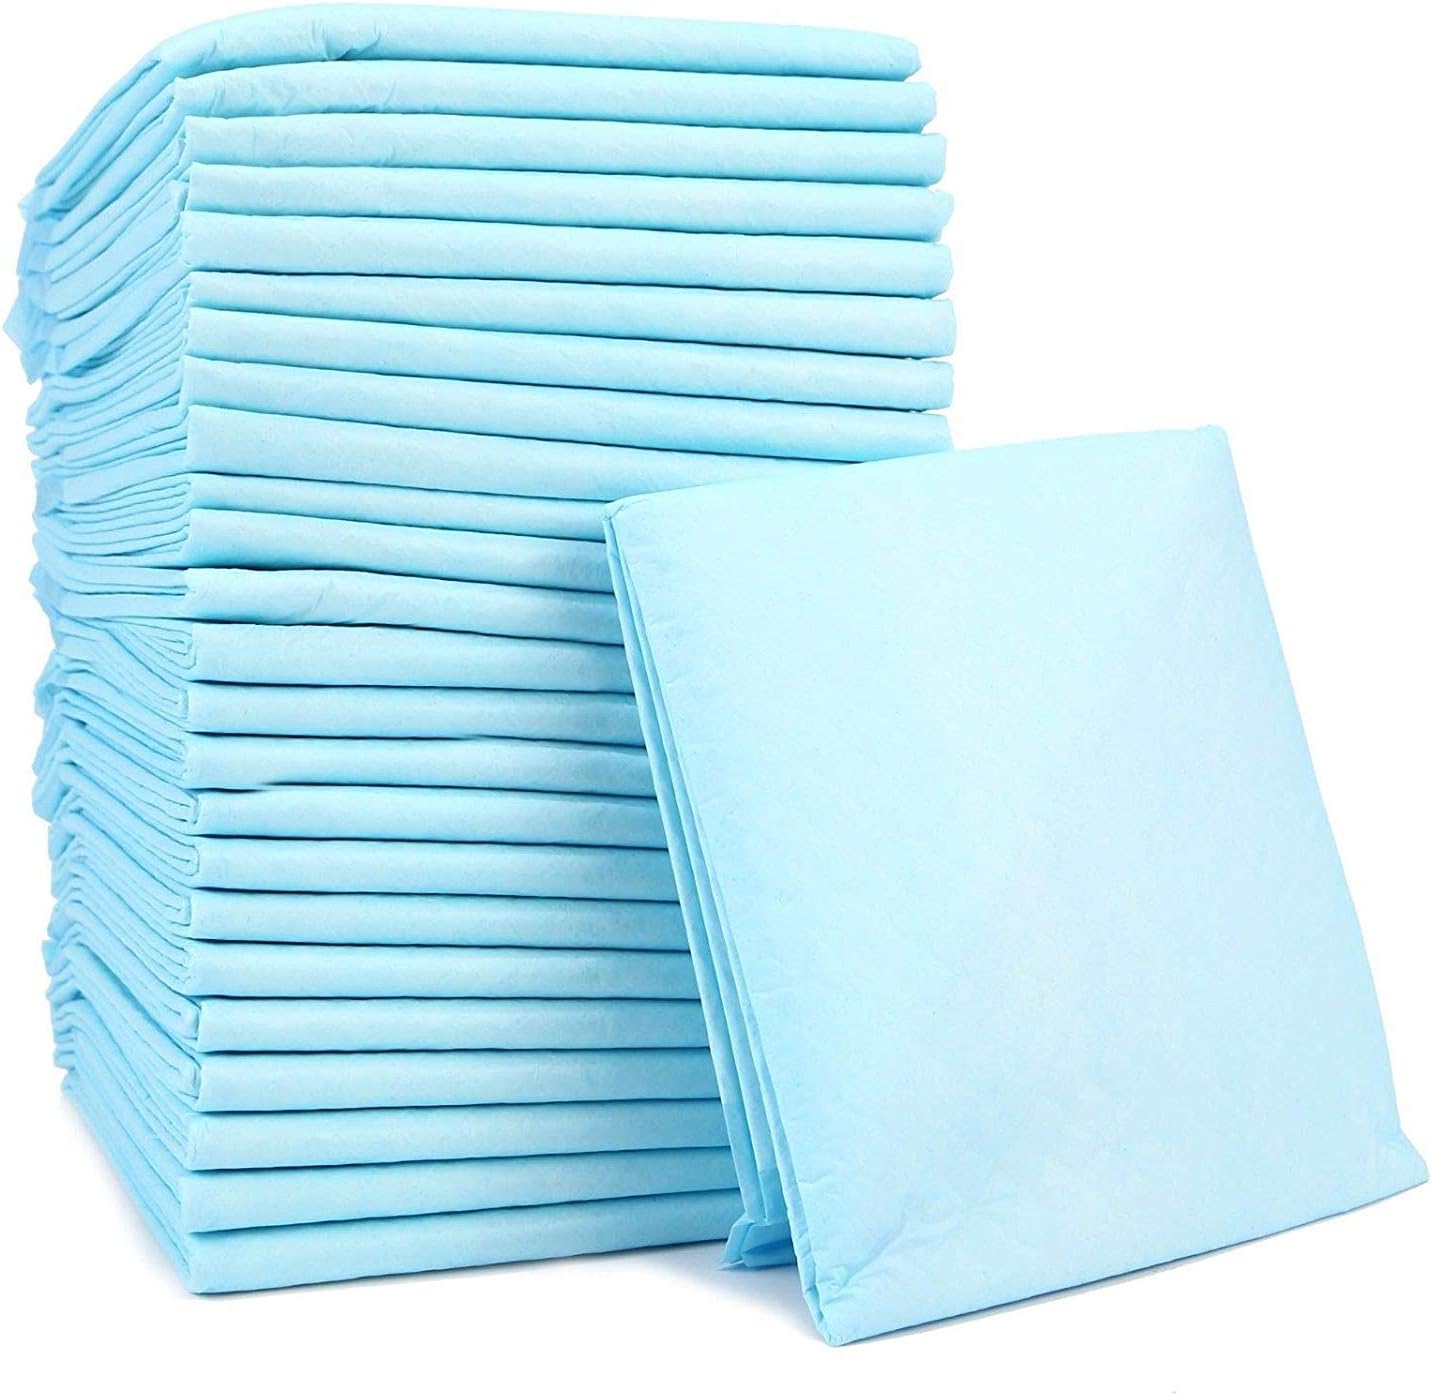 50 Disposable Mats 40x60cm Baby Potty Training Pads Sheet Bed Pee Underpads Changing Sheets